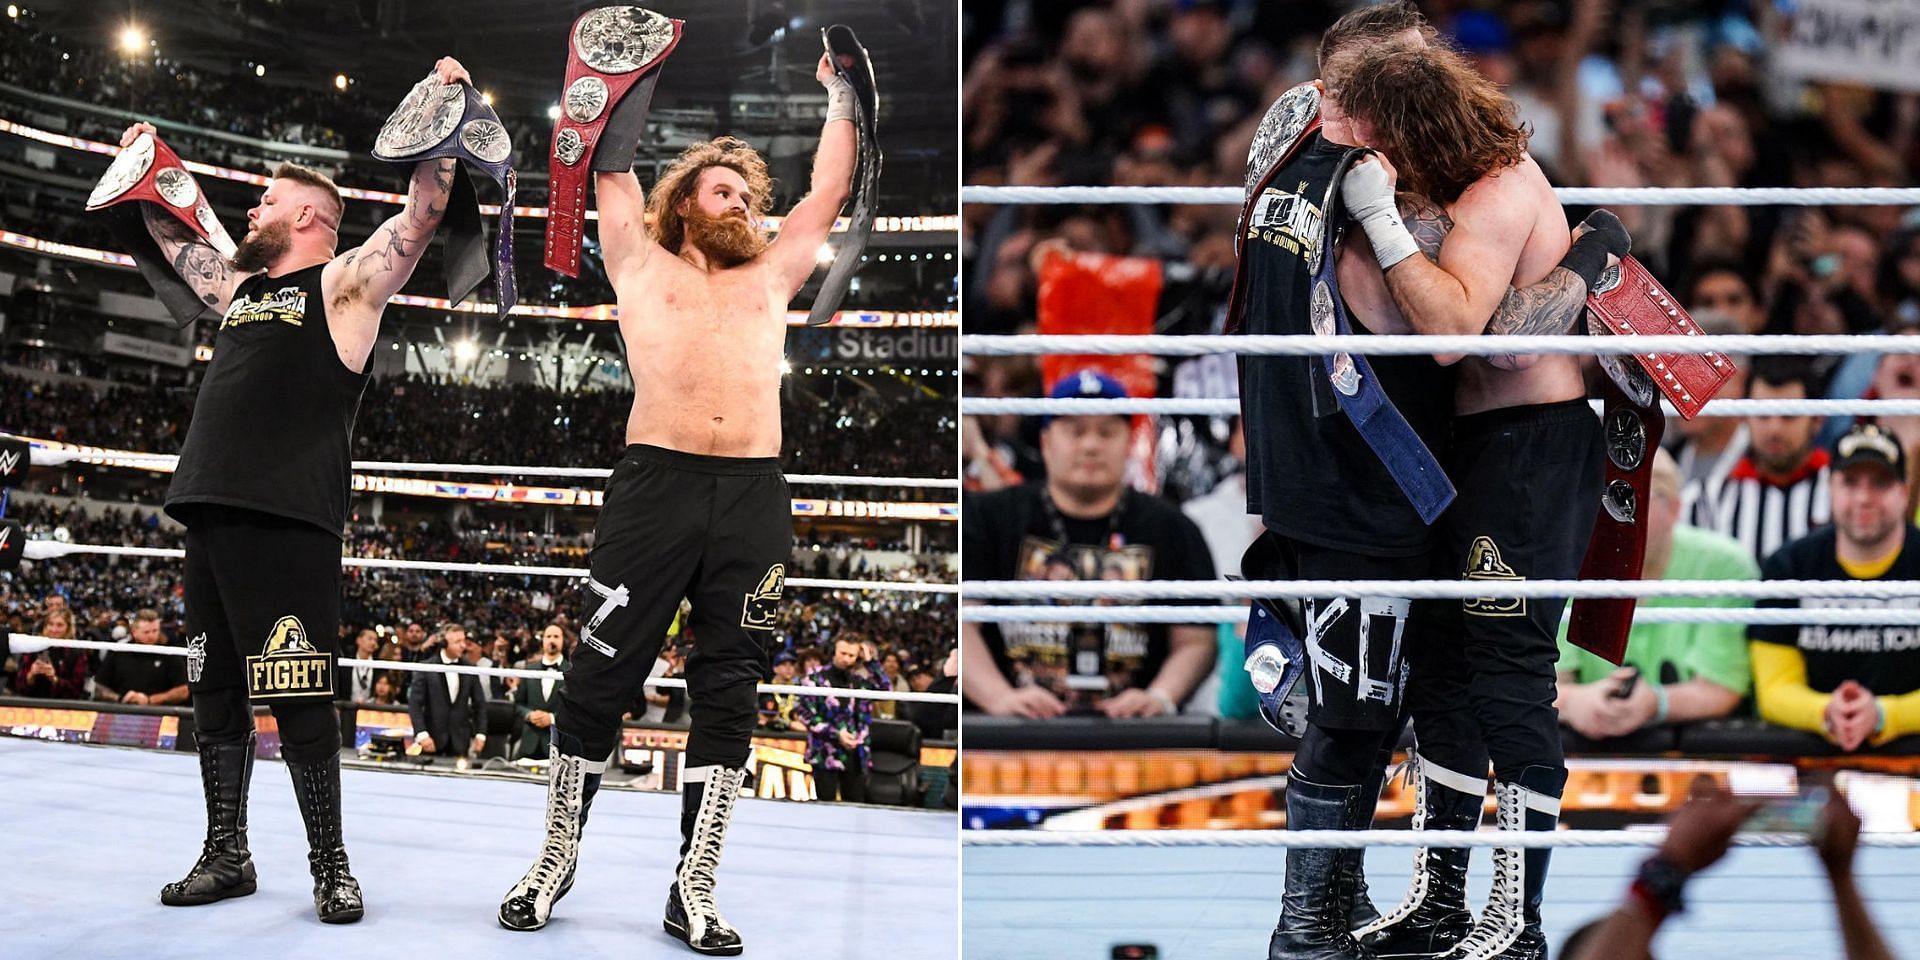 Could see Kevin Owens and Sami Zayn lose thetag titles soon?